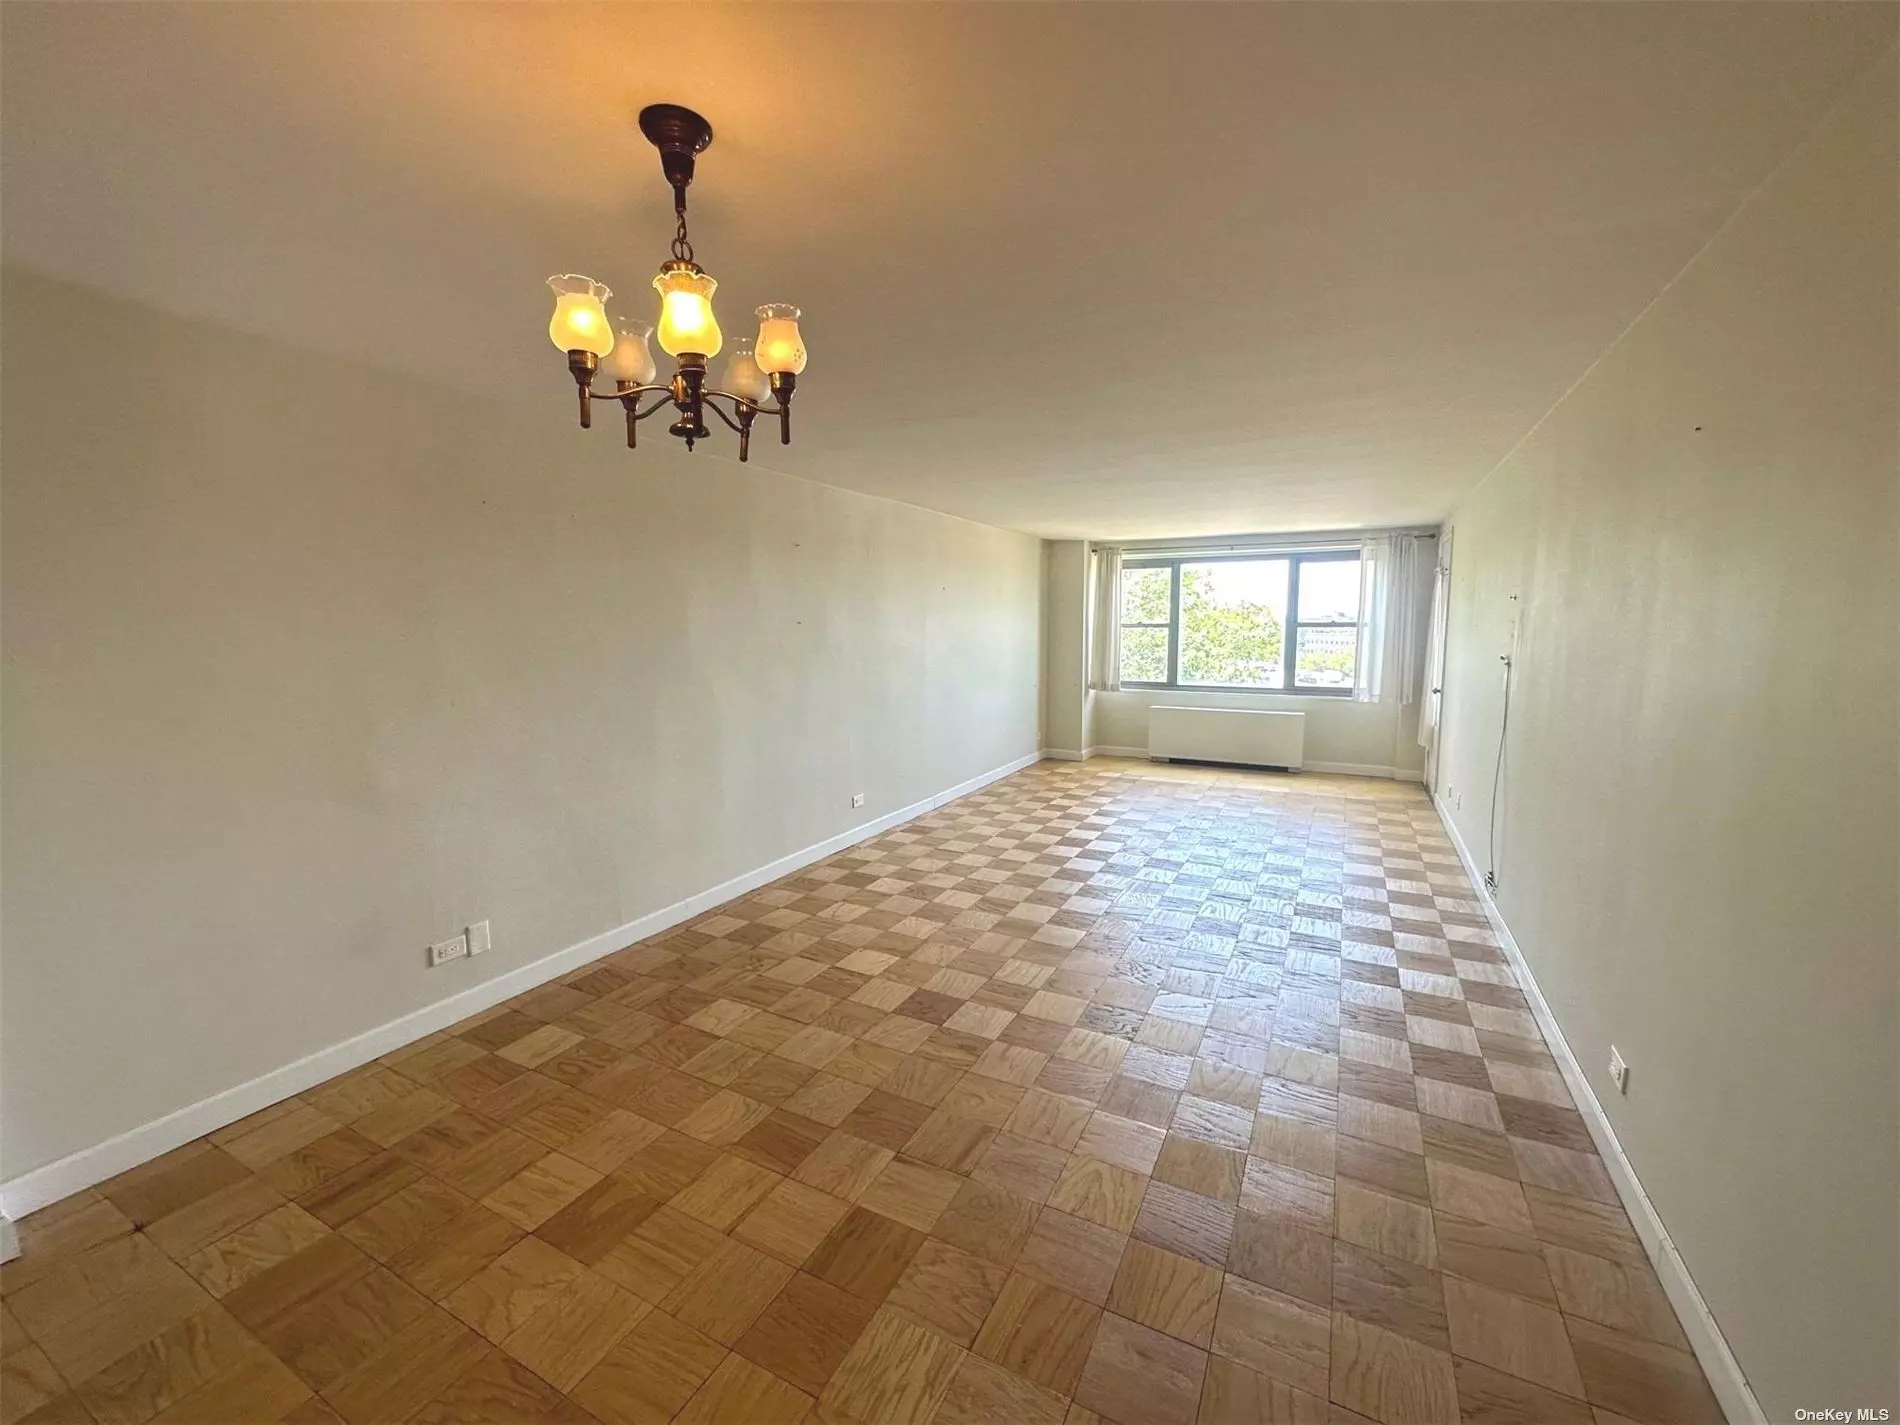 Magnificent 1 bedroom apartment for sale in Forest Hills NY. This apartment features parquet floors and a remodel apartment.  The Fairview building is a pet friendly building, has a 24 hour doorman and has heat, water, taxes, electric & gas all included in the monthly maintenance.  Tennis court across the street.